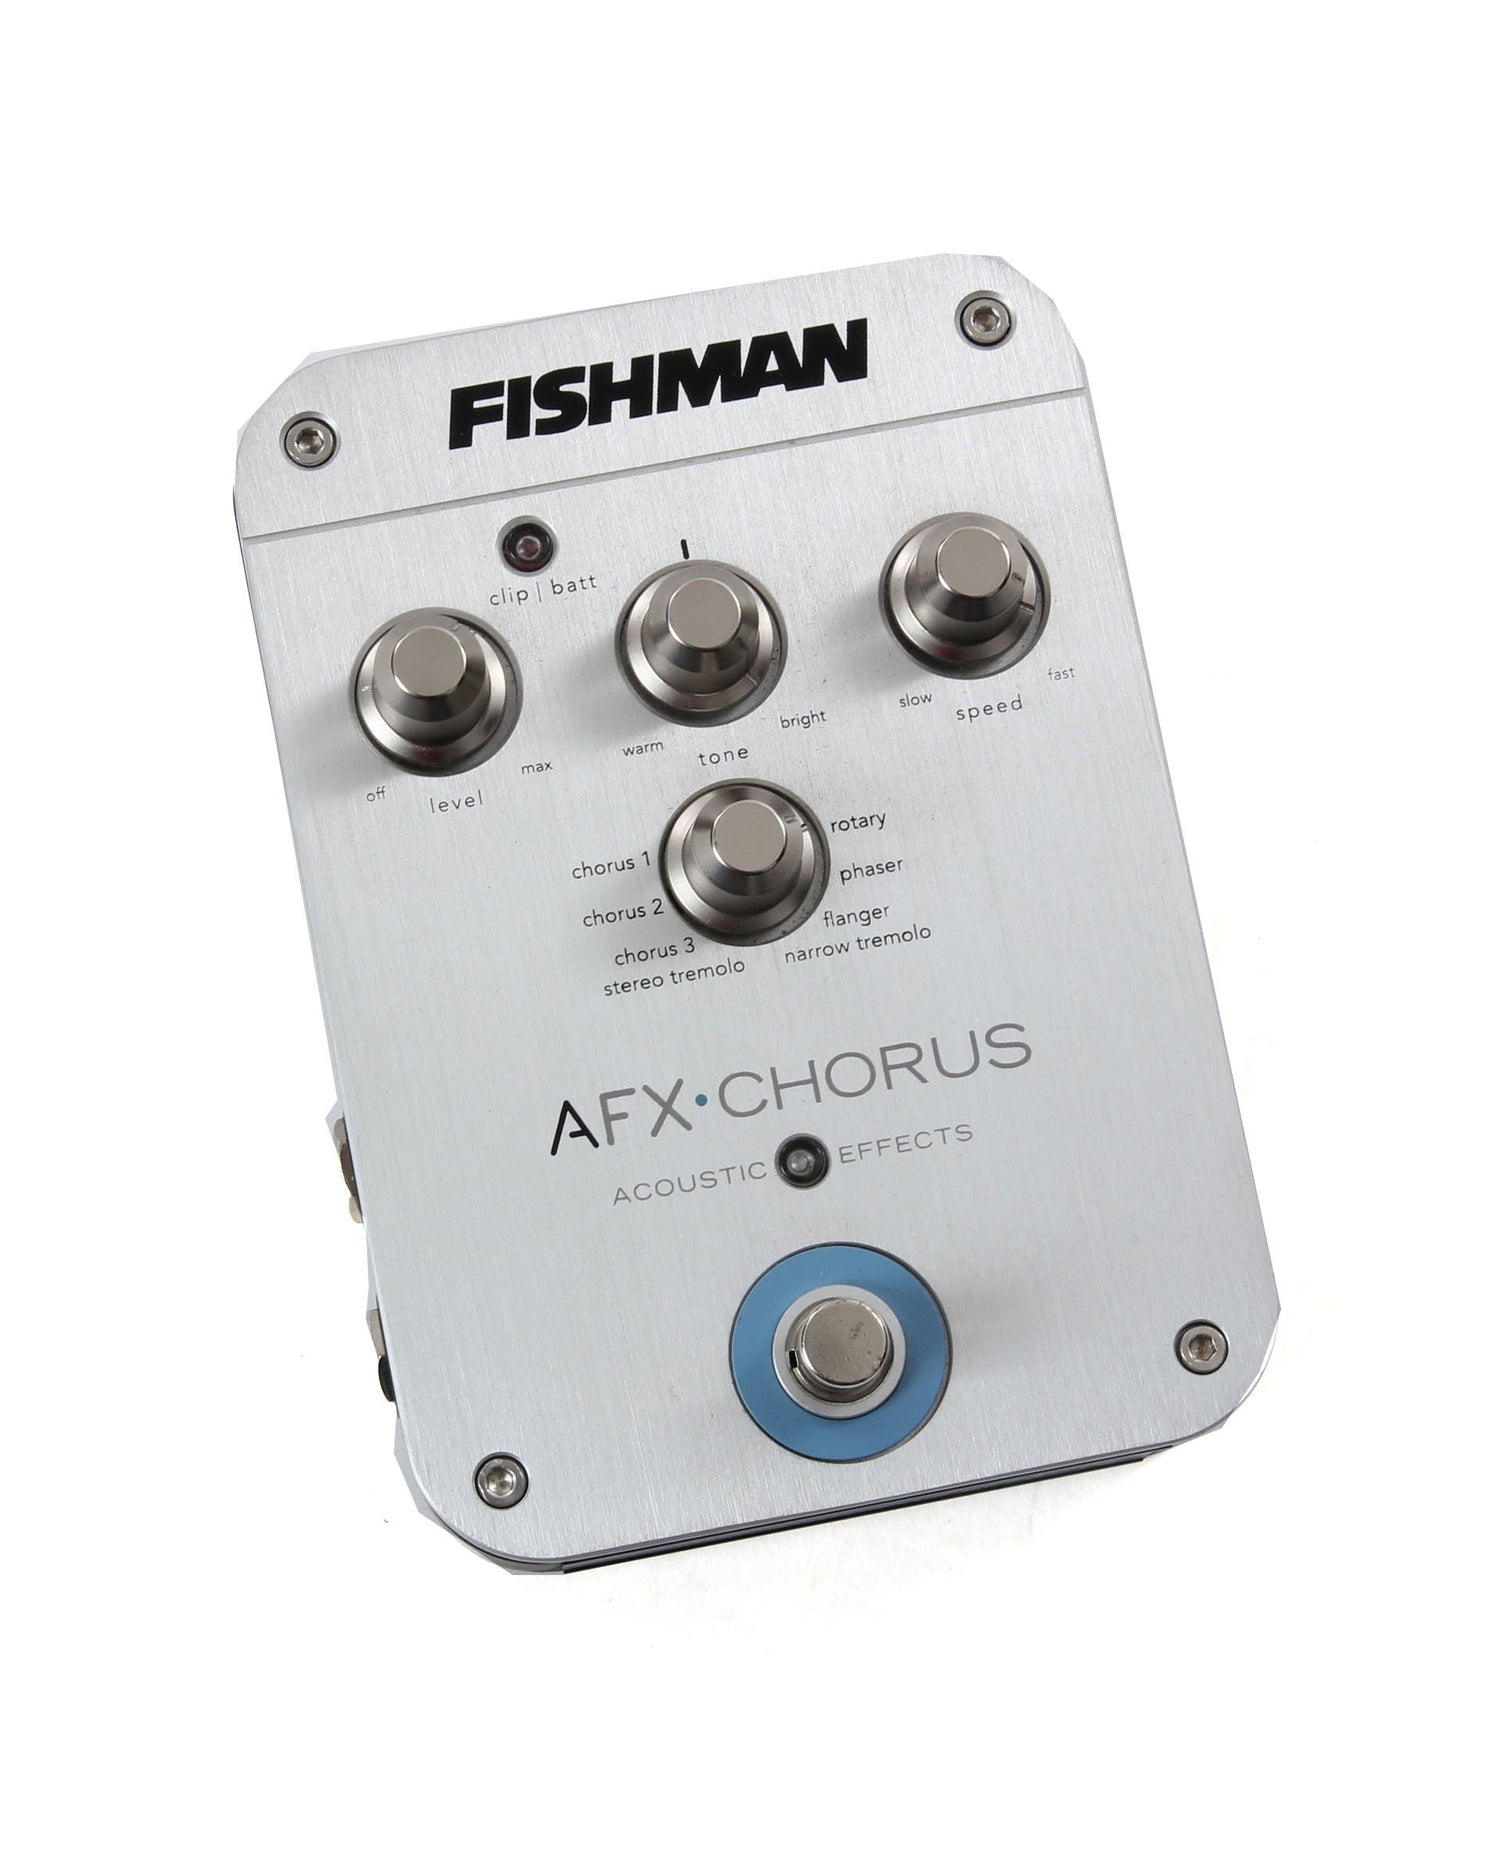 Image 1 of Fishman Afx Chorus Pedal - SKU# 135U-7693 : Product Type Other : Elderly Instruments